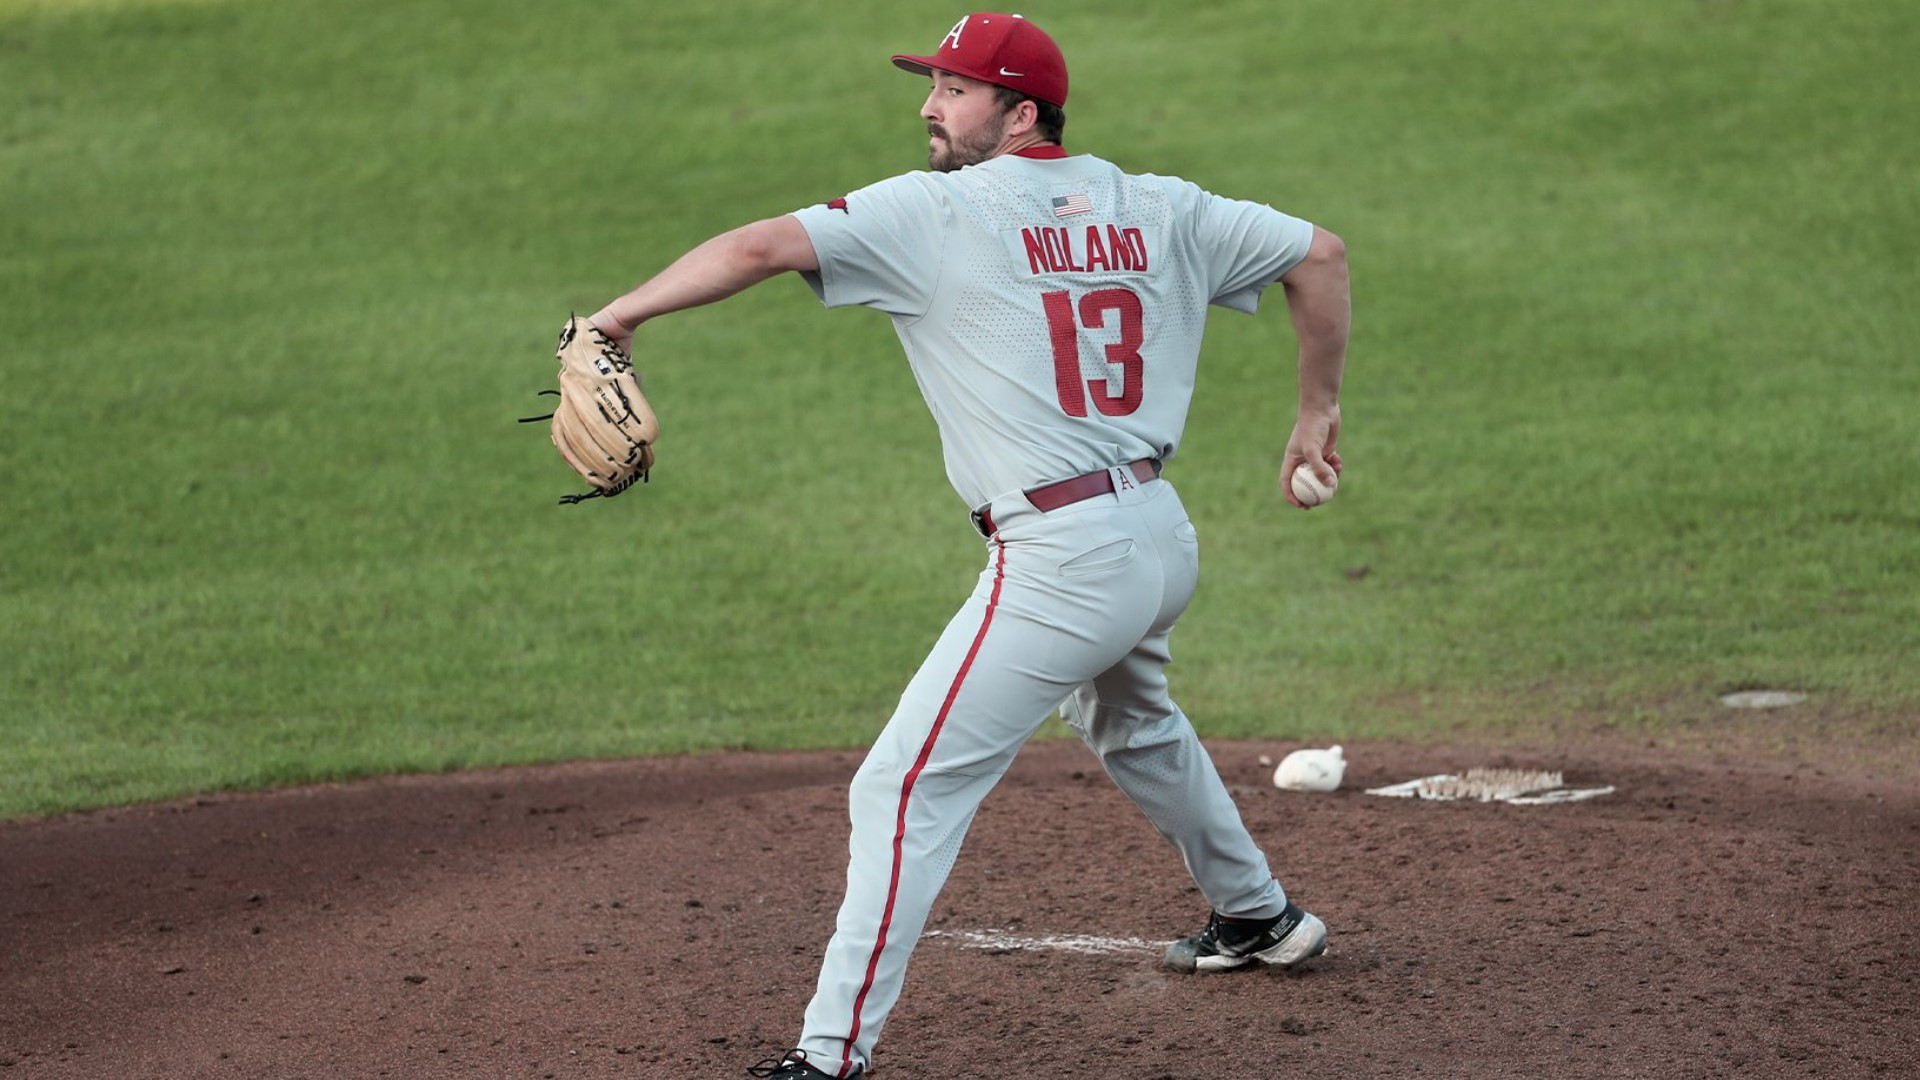 Noland will start Saturday's College World Series opener against Stanford, looking to continue a senior season that's showcased his talent as well as his toughness.